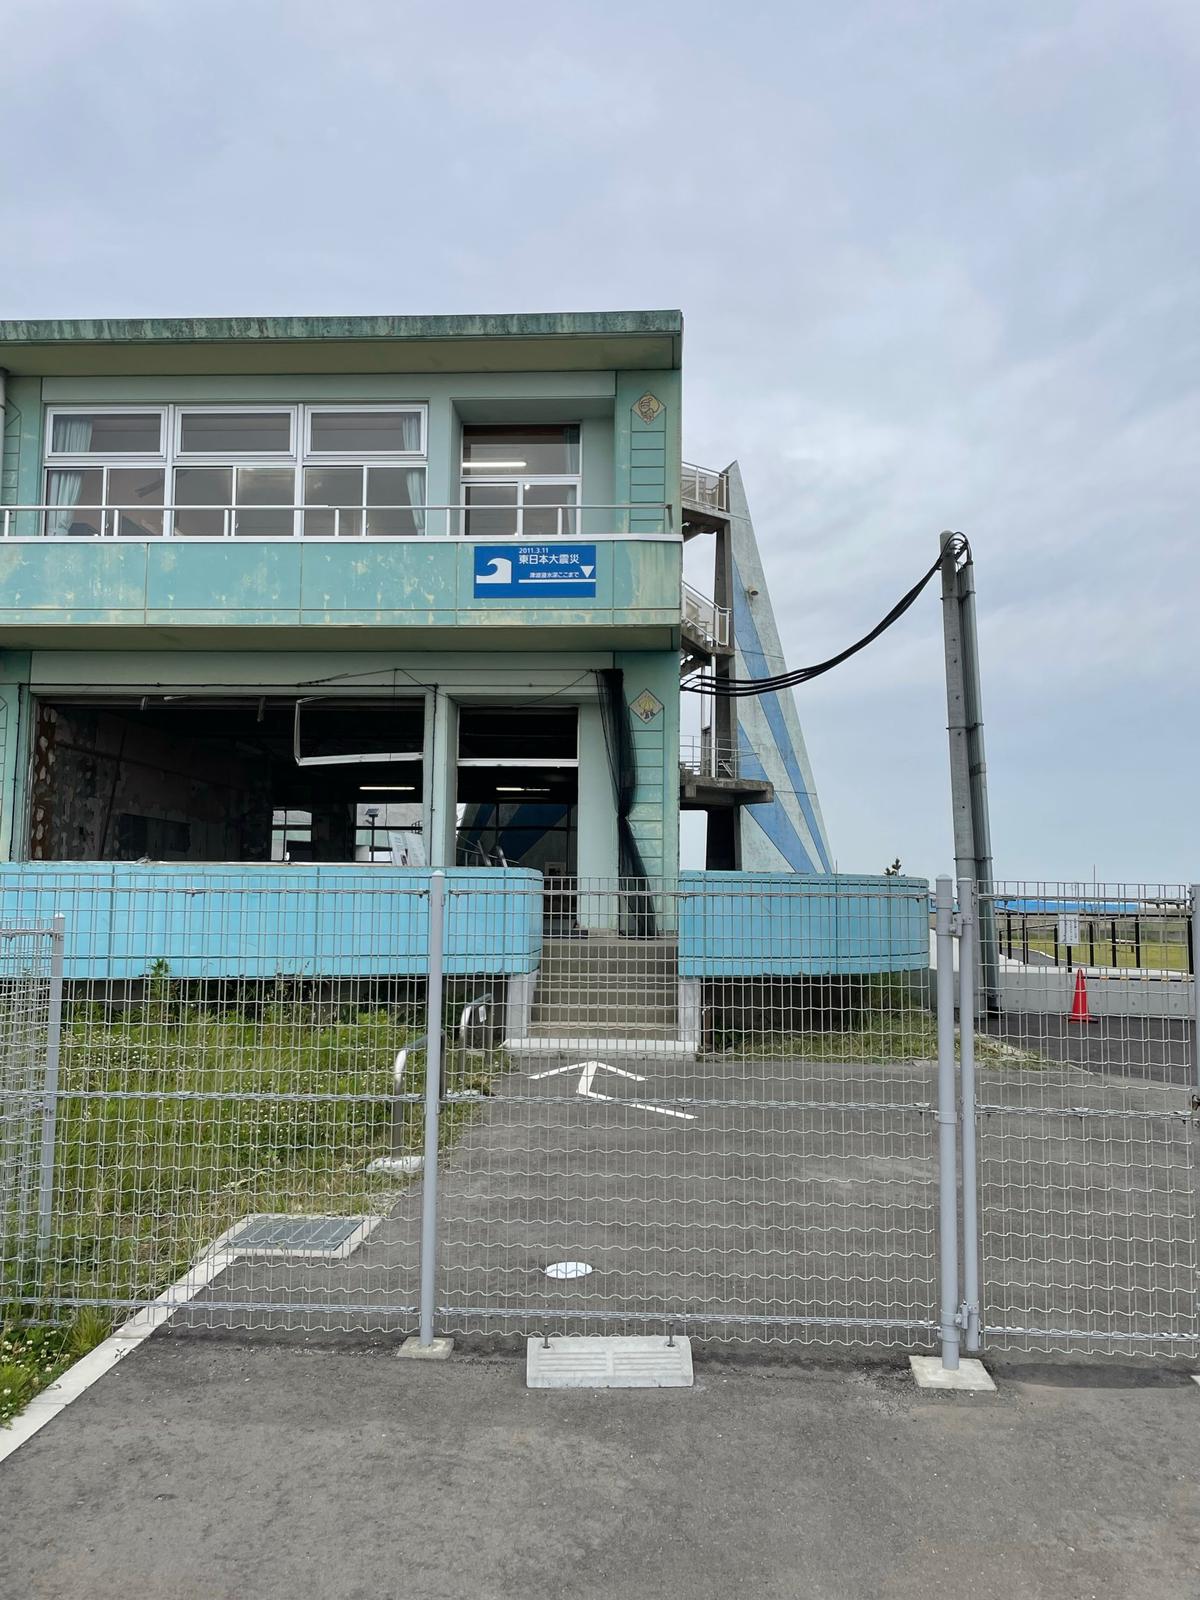 Ukedo Elementary School ruins. A blue sign on the second floor shows how high the water reached during the tsunami.